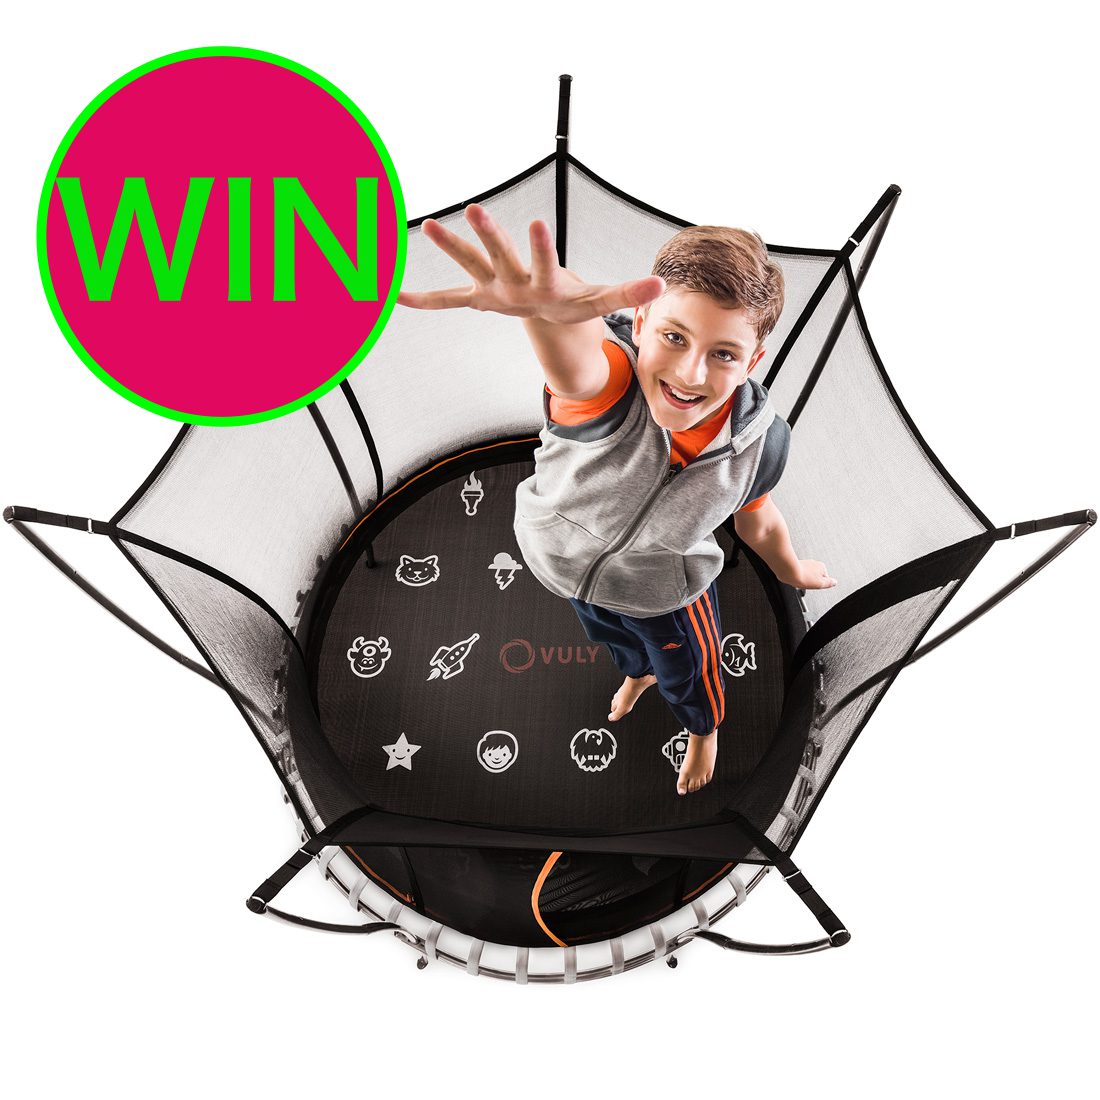 VULY TRAMPOLINES – a great gift for Christmas!